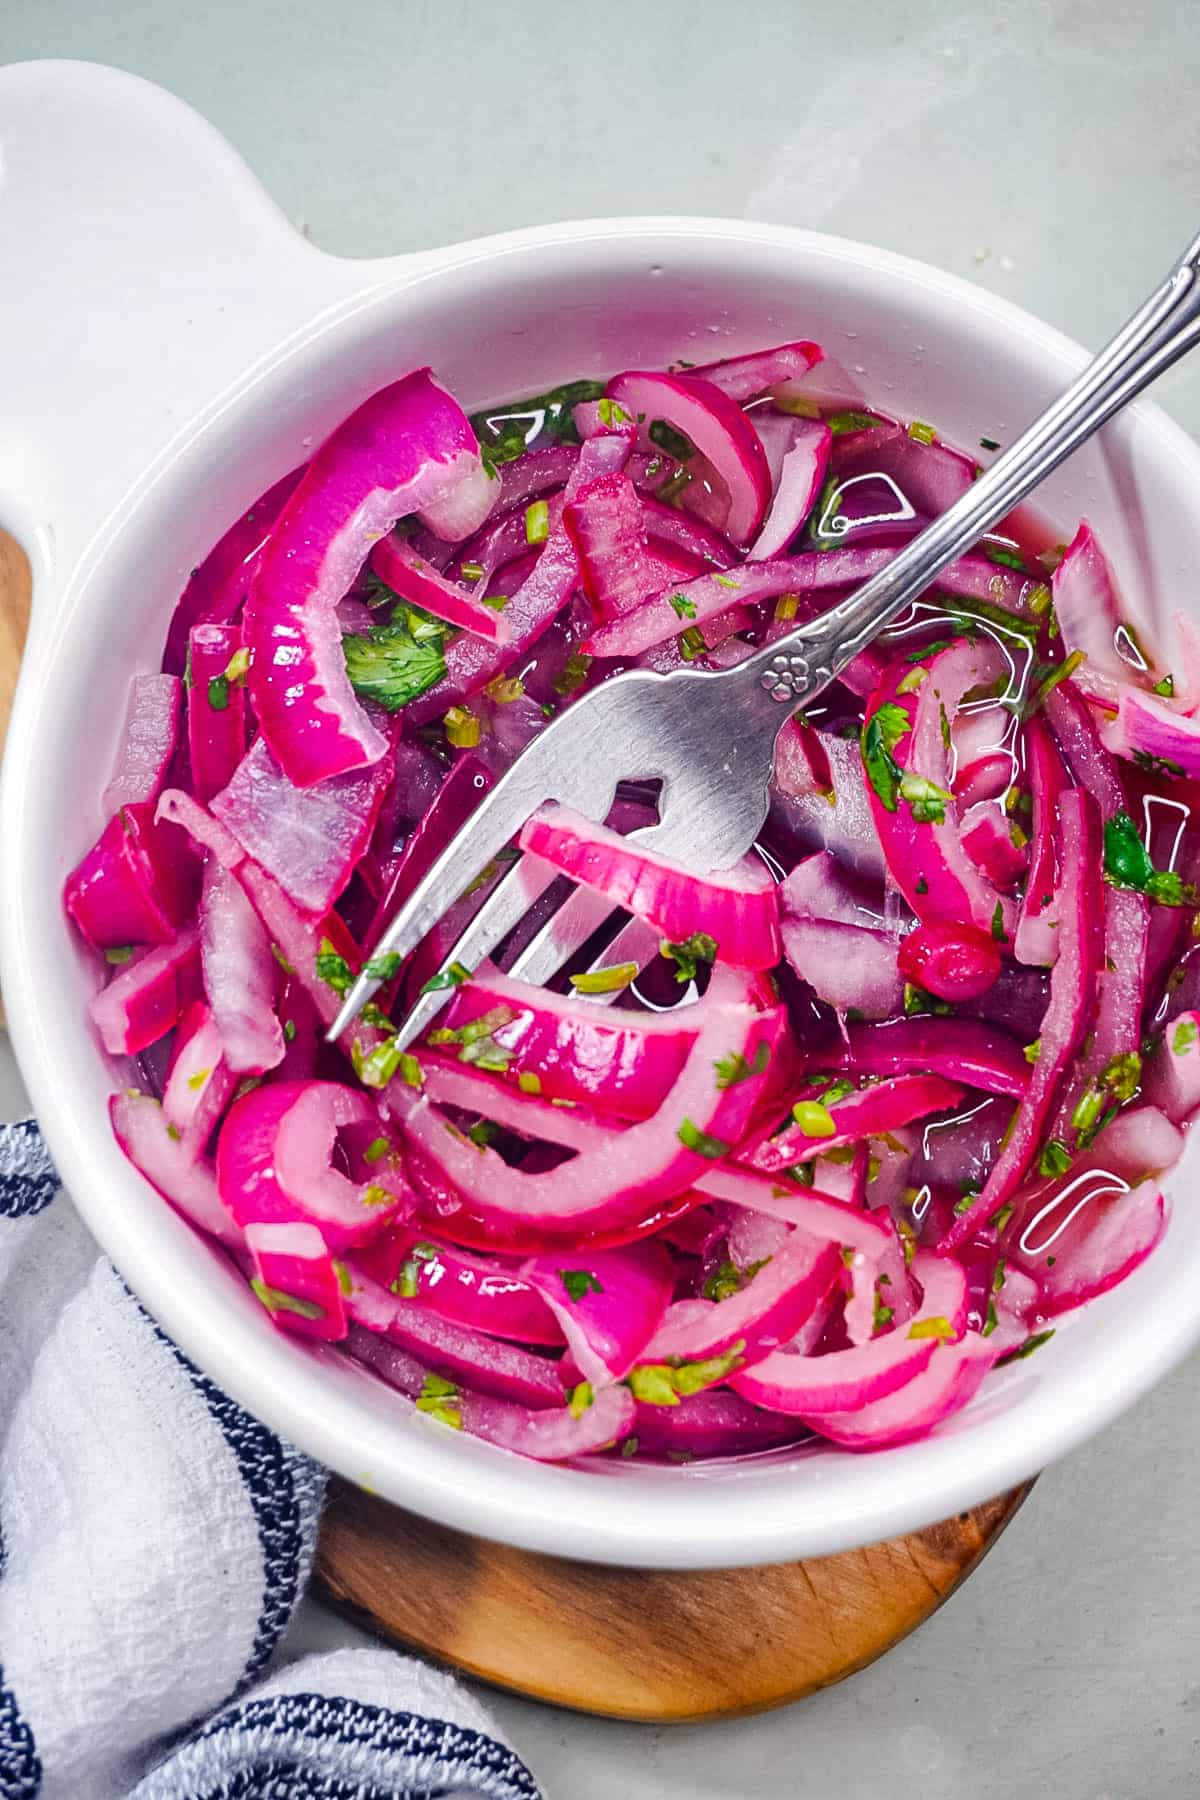 A bowl of the red pickled onions needed for the breakfast tacos.